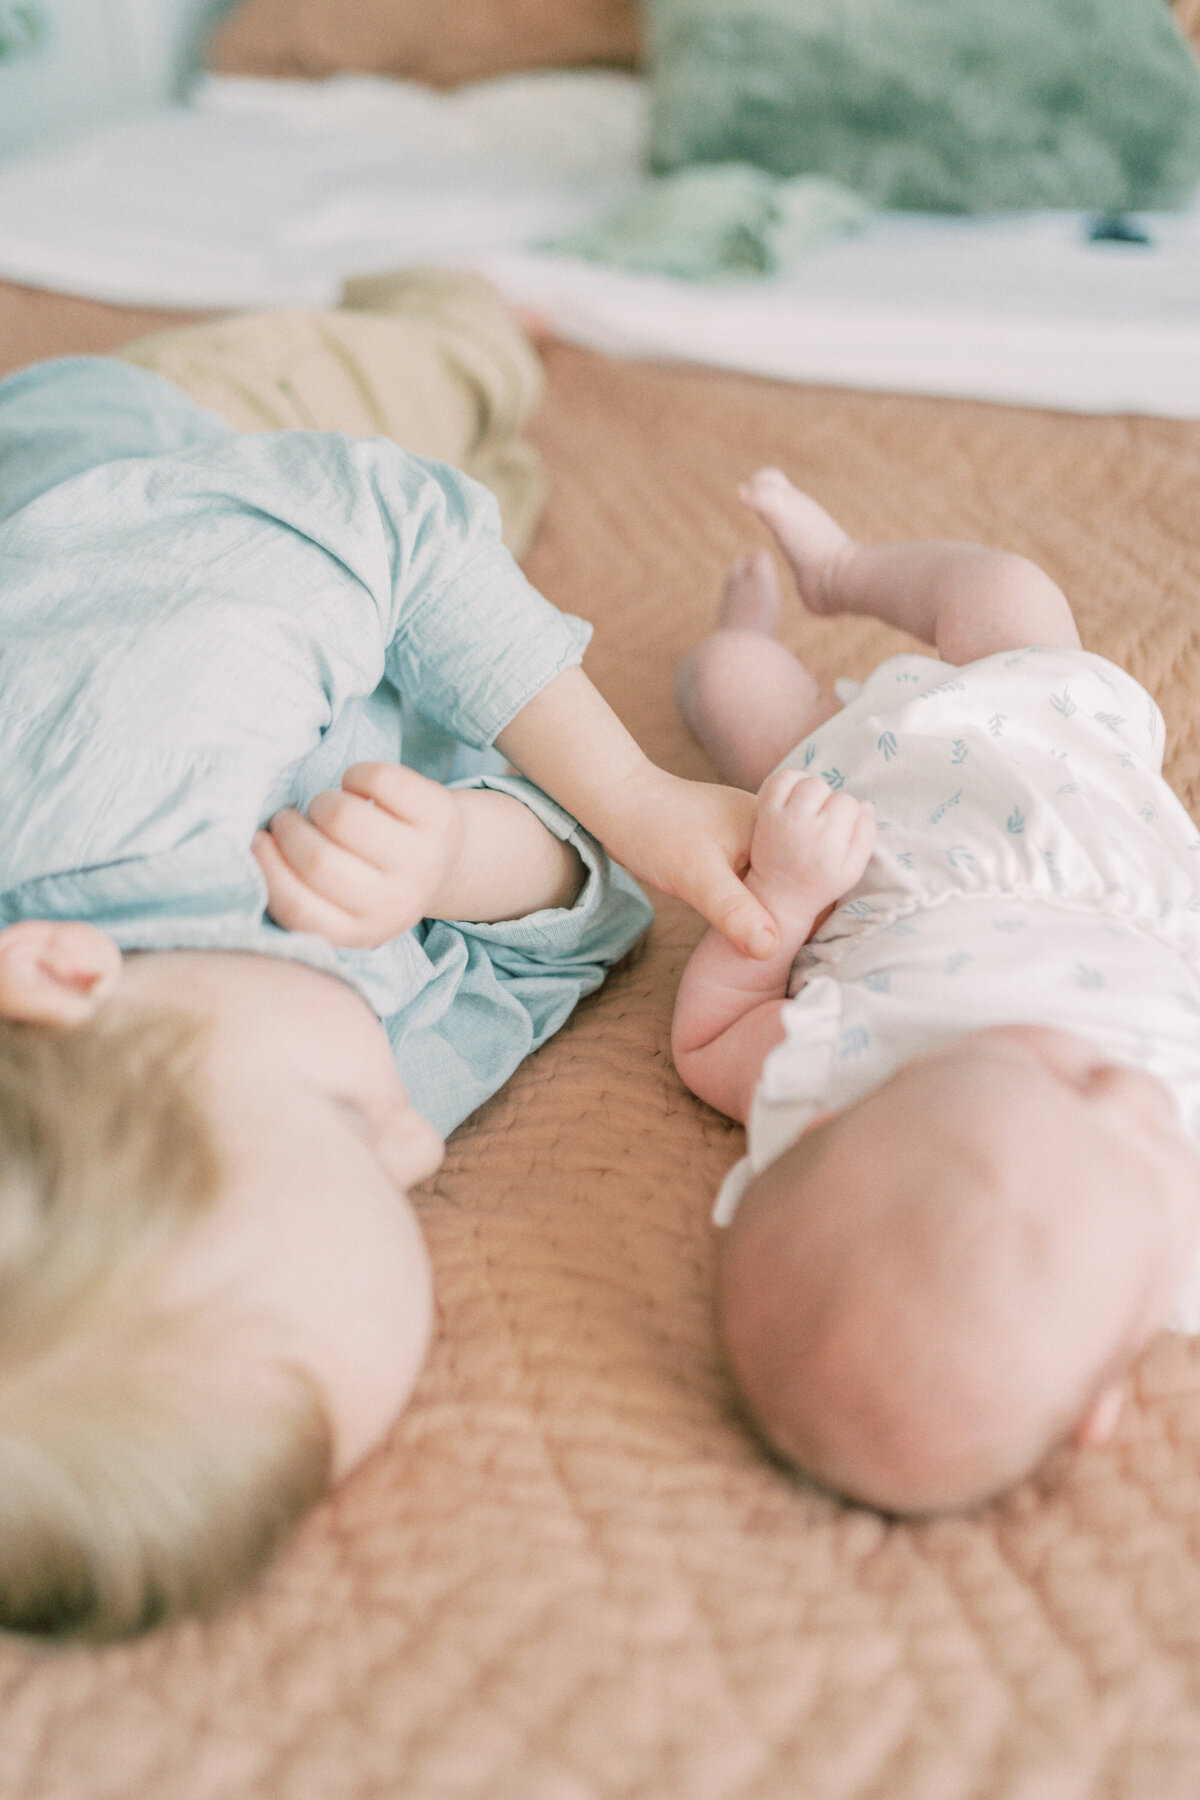 Big brother plays with baby sisters hand as they lay on the bed by Oklahoma City Family Photographer Courtney Cronin